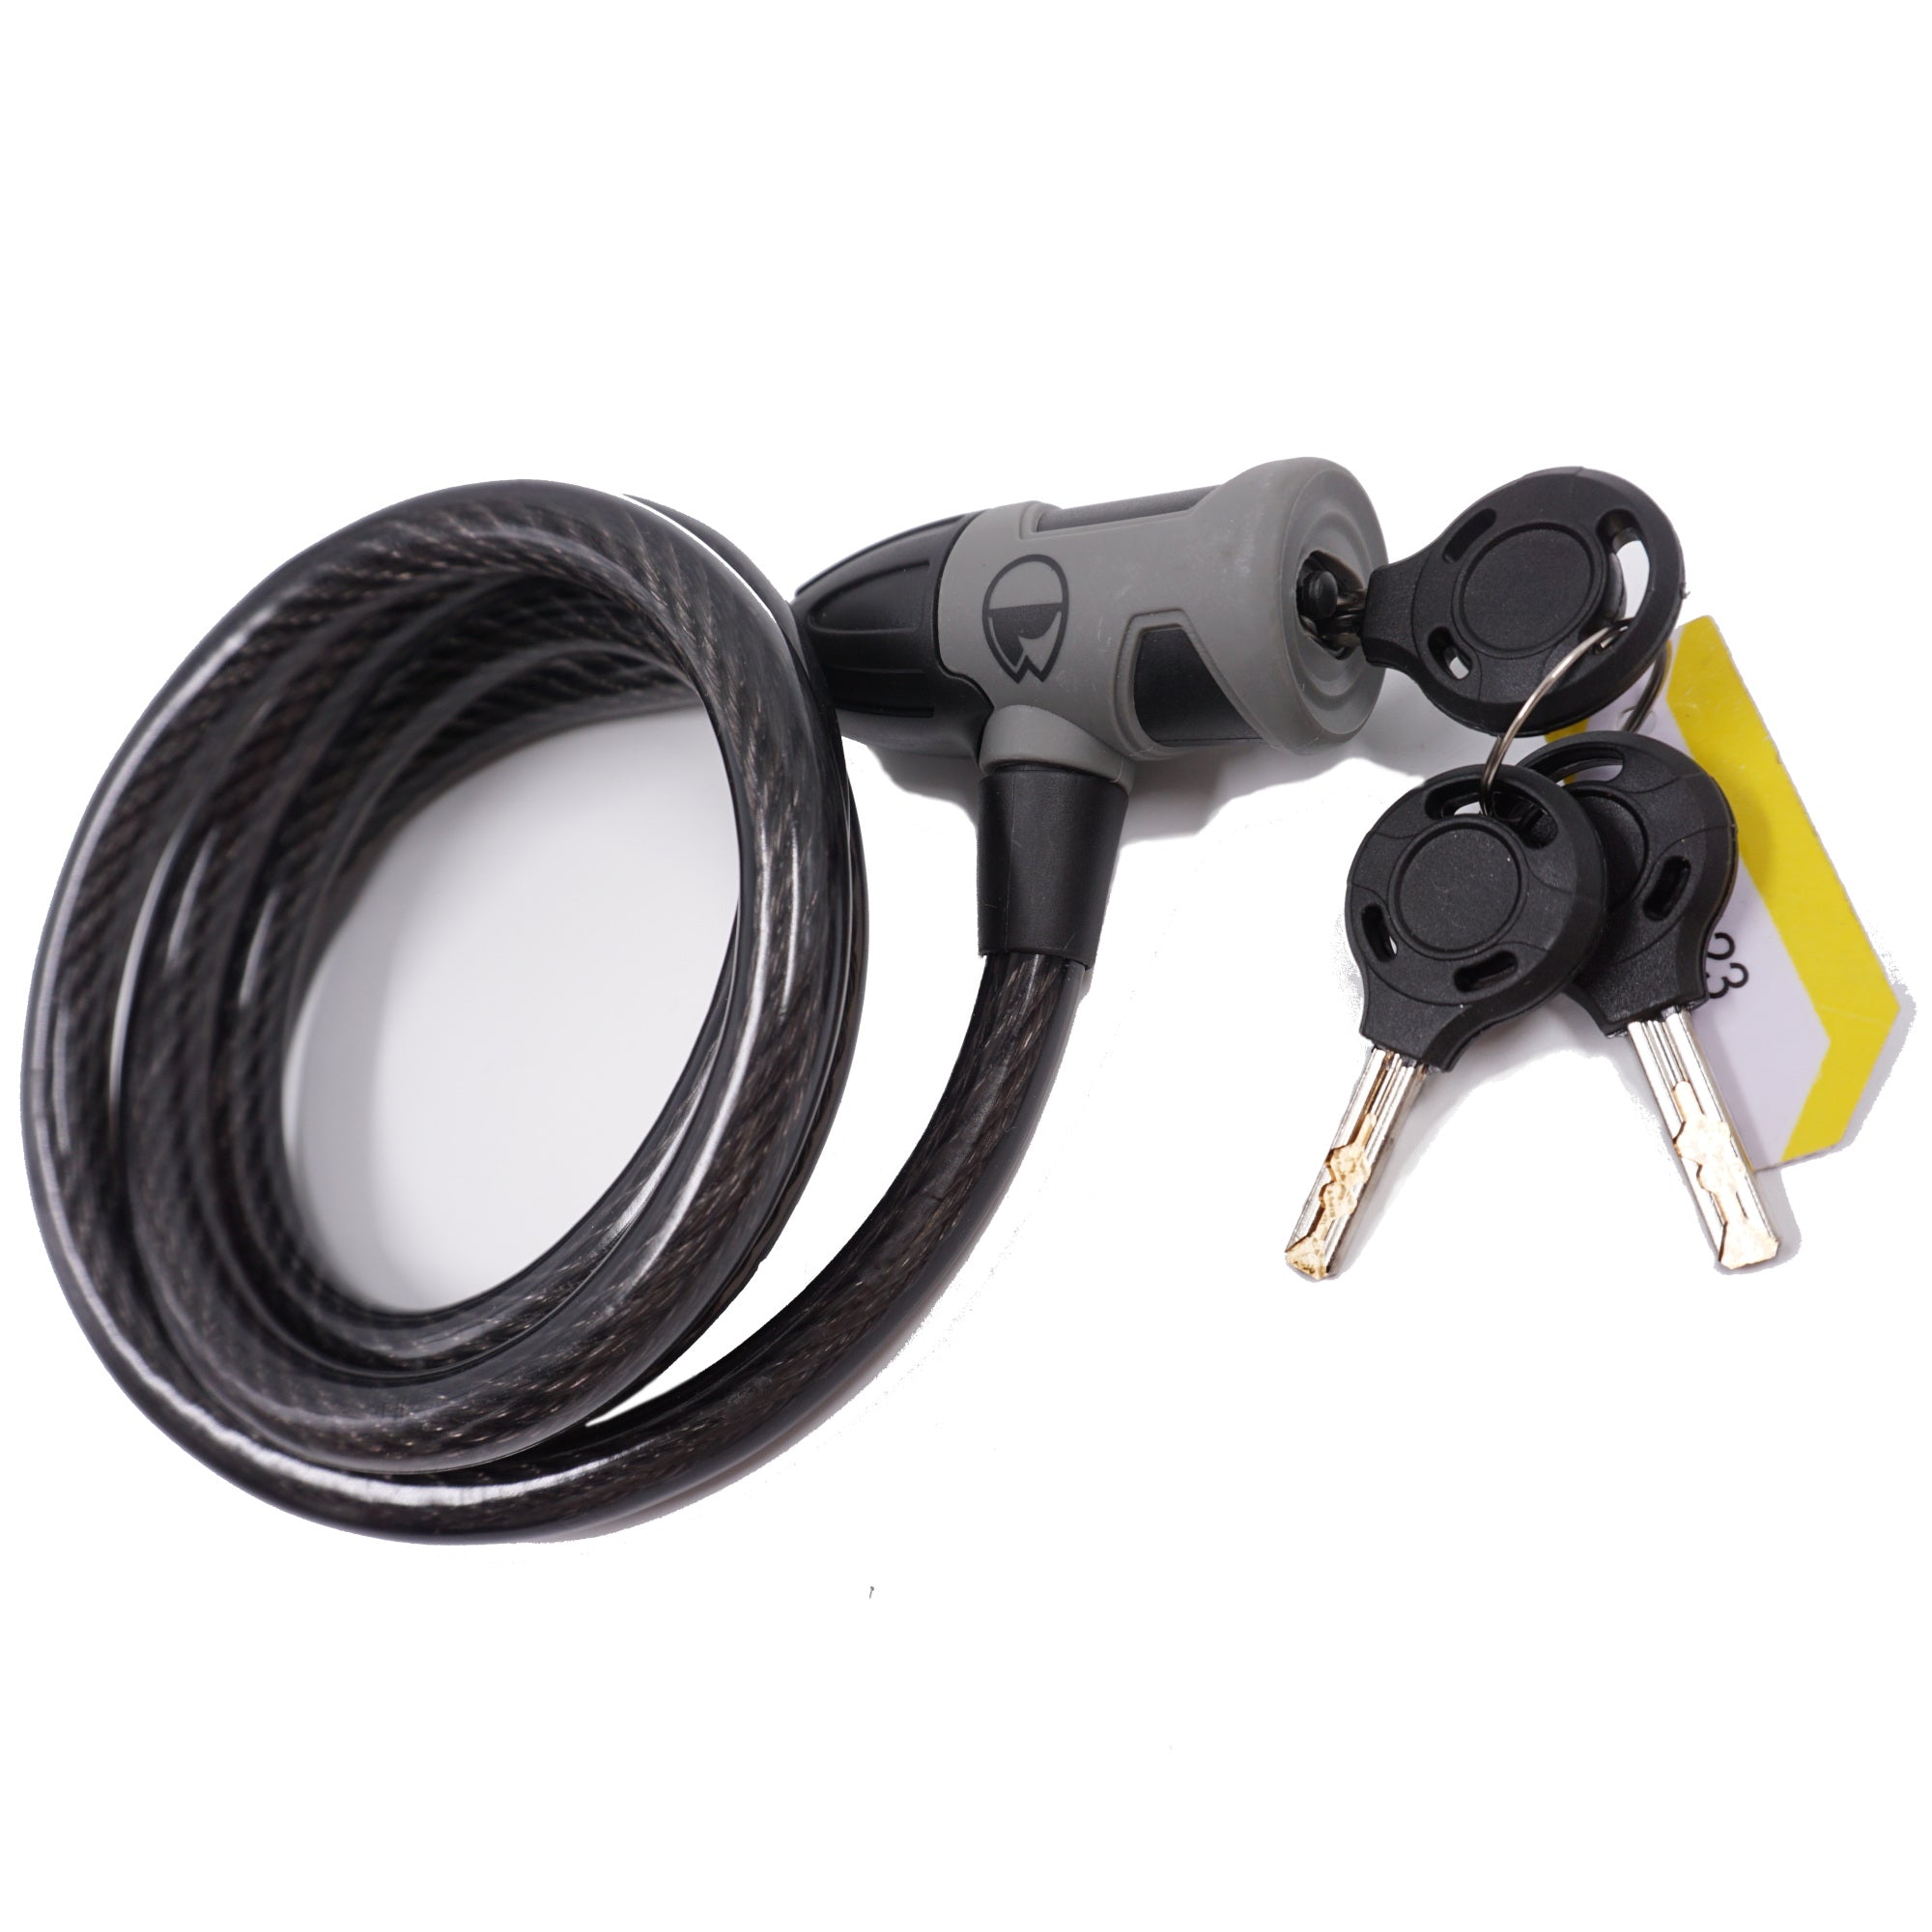 Rocky Mounts Five-O Key Cable Lock 12mm x 6ft